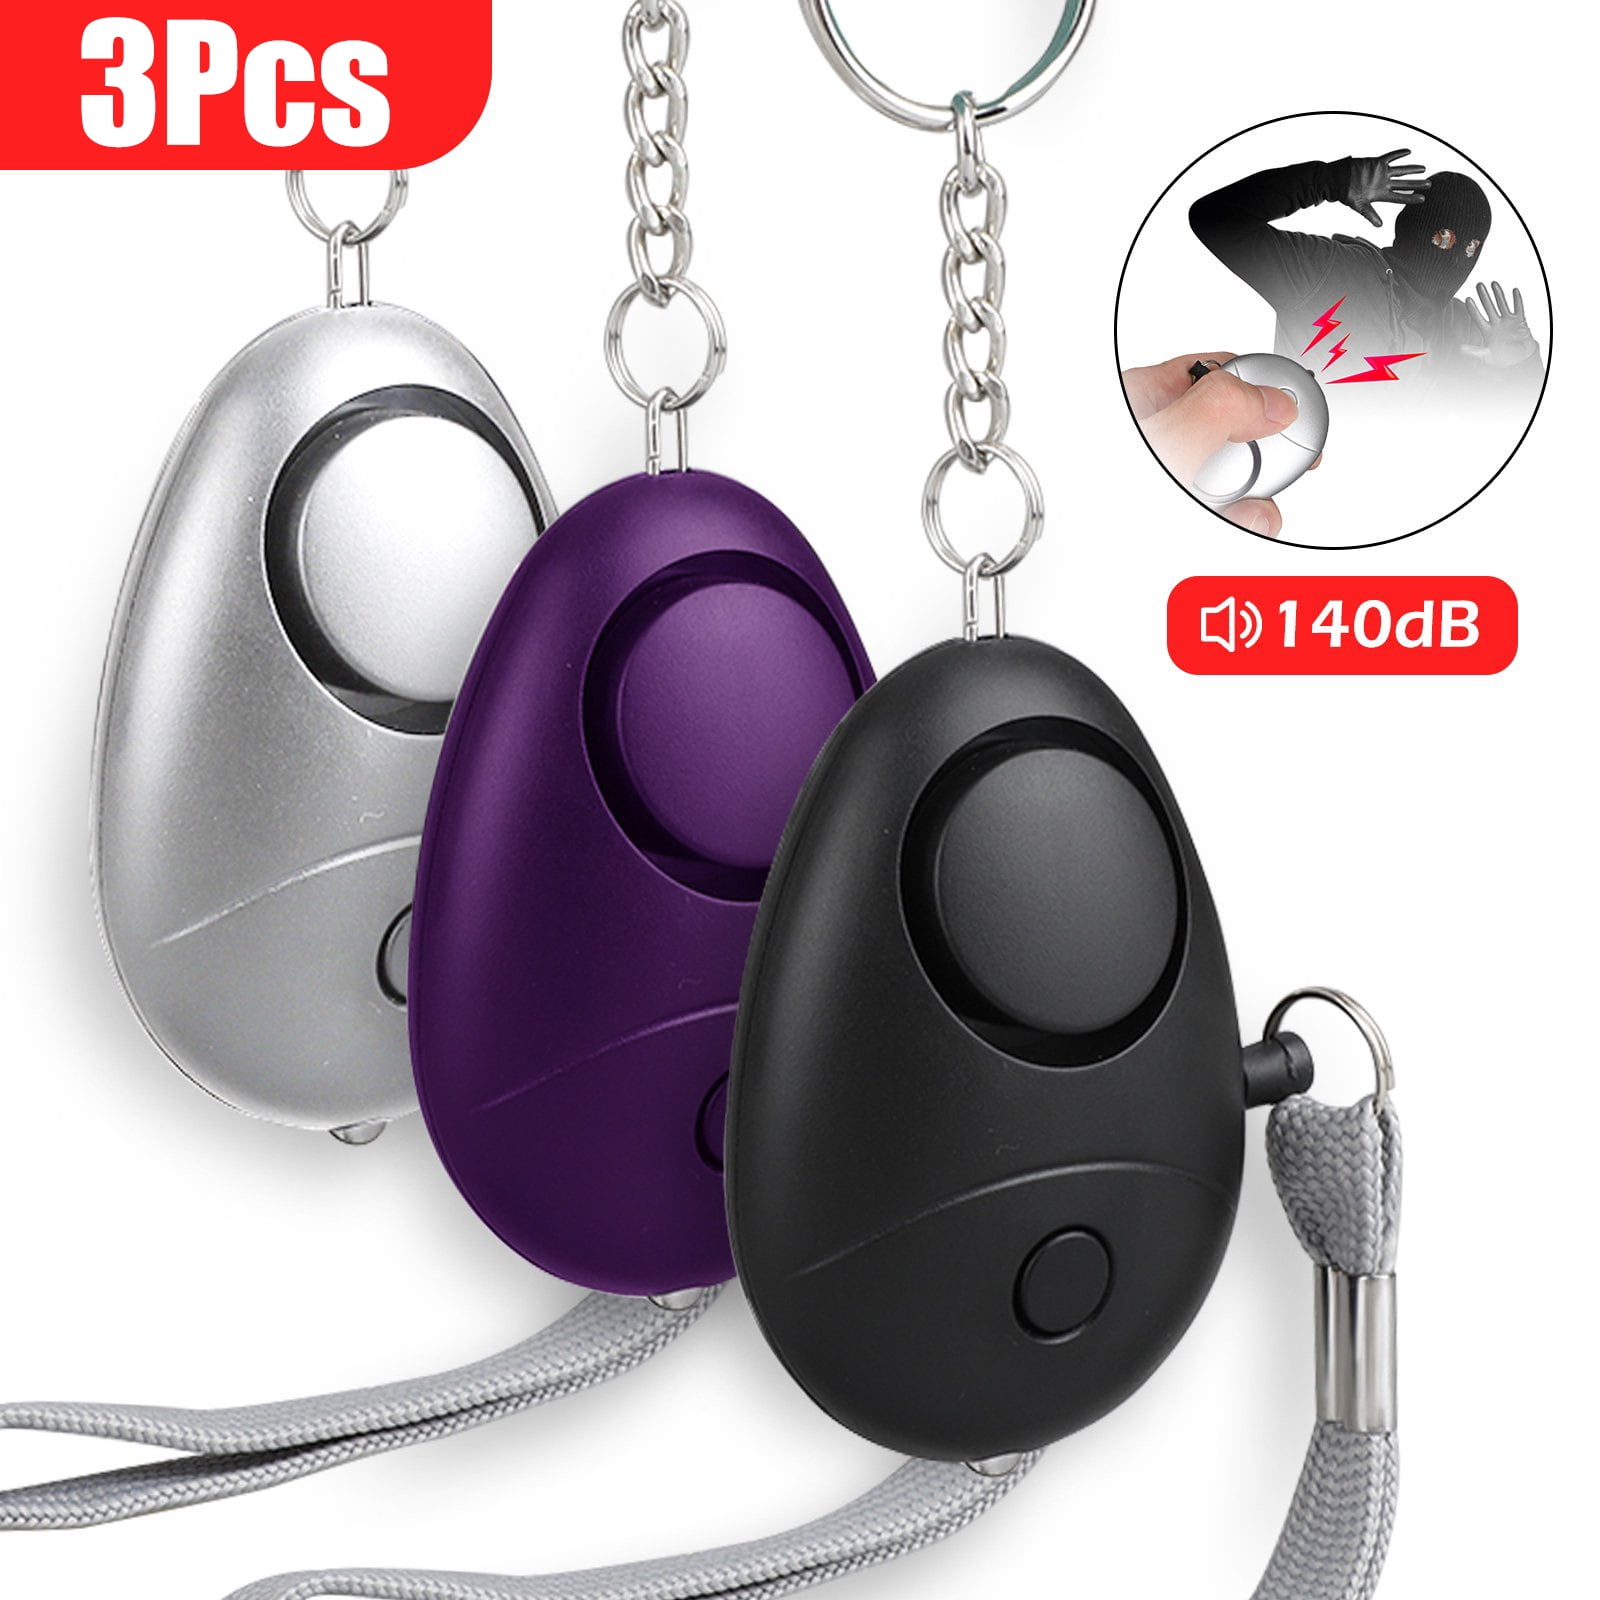 Pocket Guardian Safesound Personal Alarm Keychain 140dB Emergency Sound Safe Personal Alarm for Seniors Woman Key Chain Alarms with Pin Led Light 